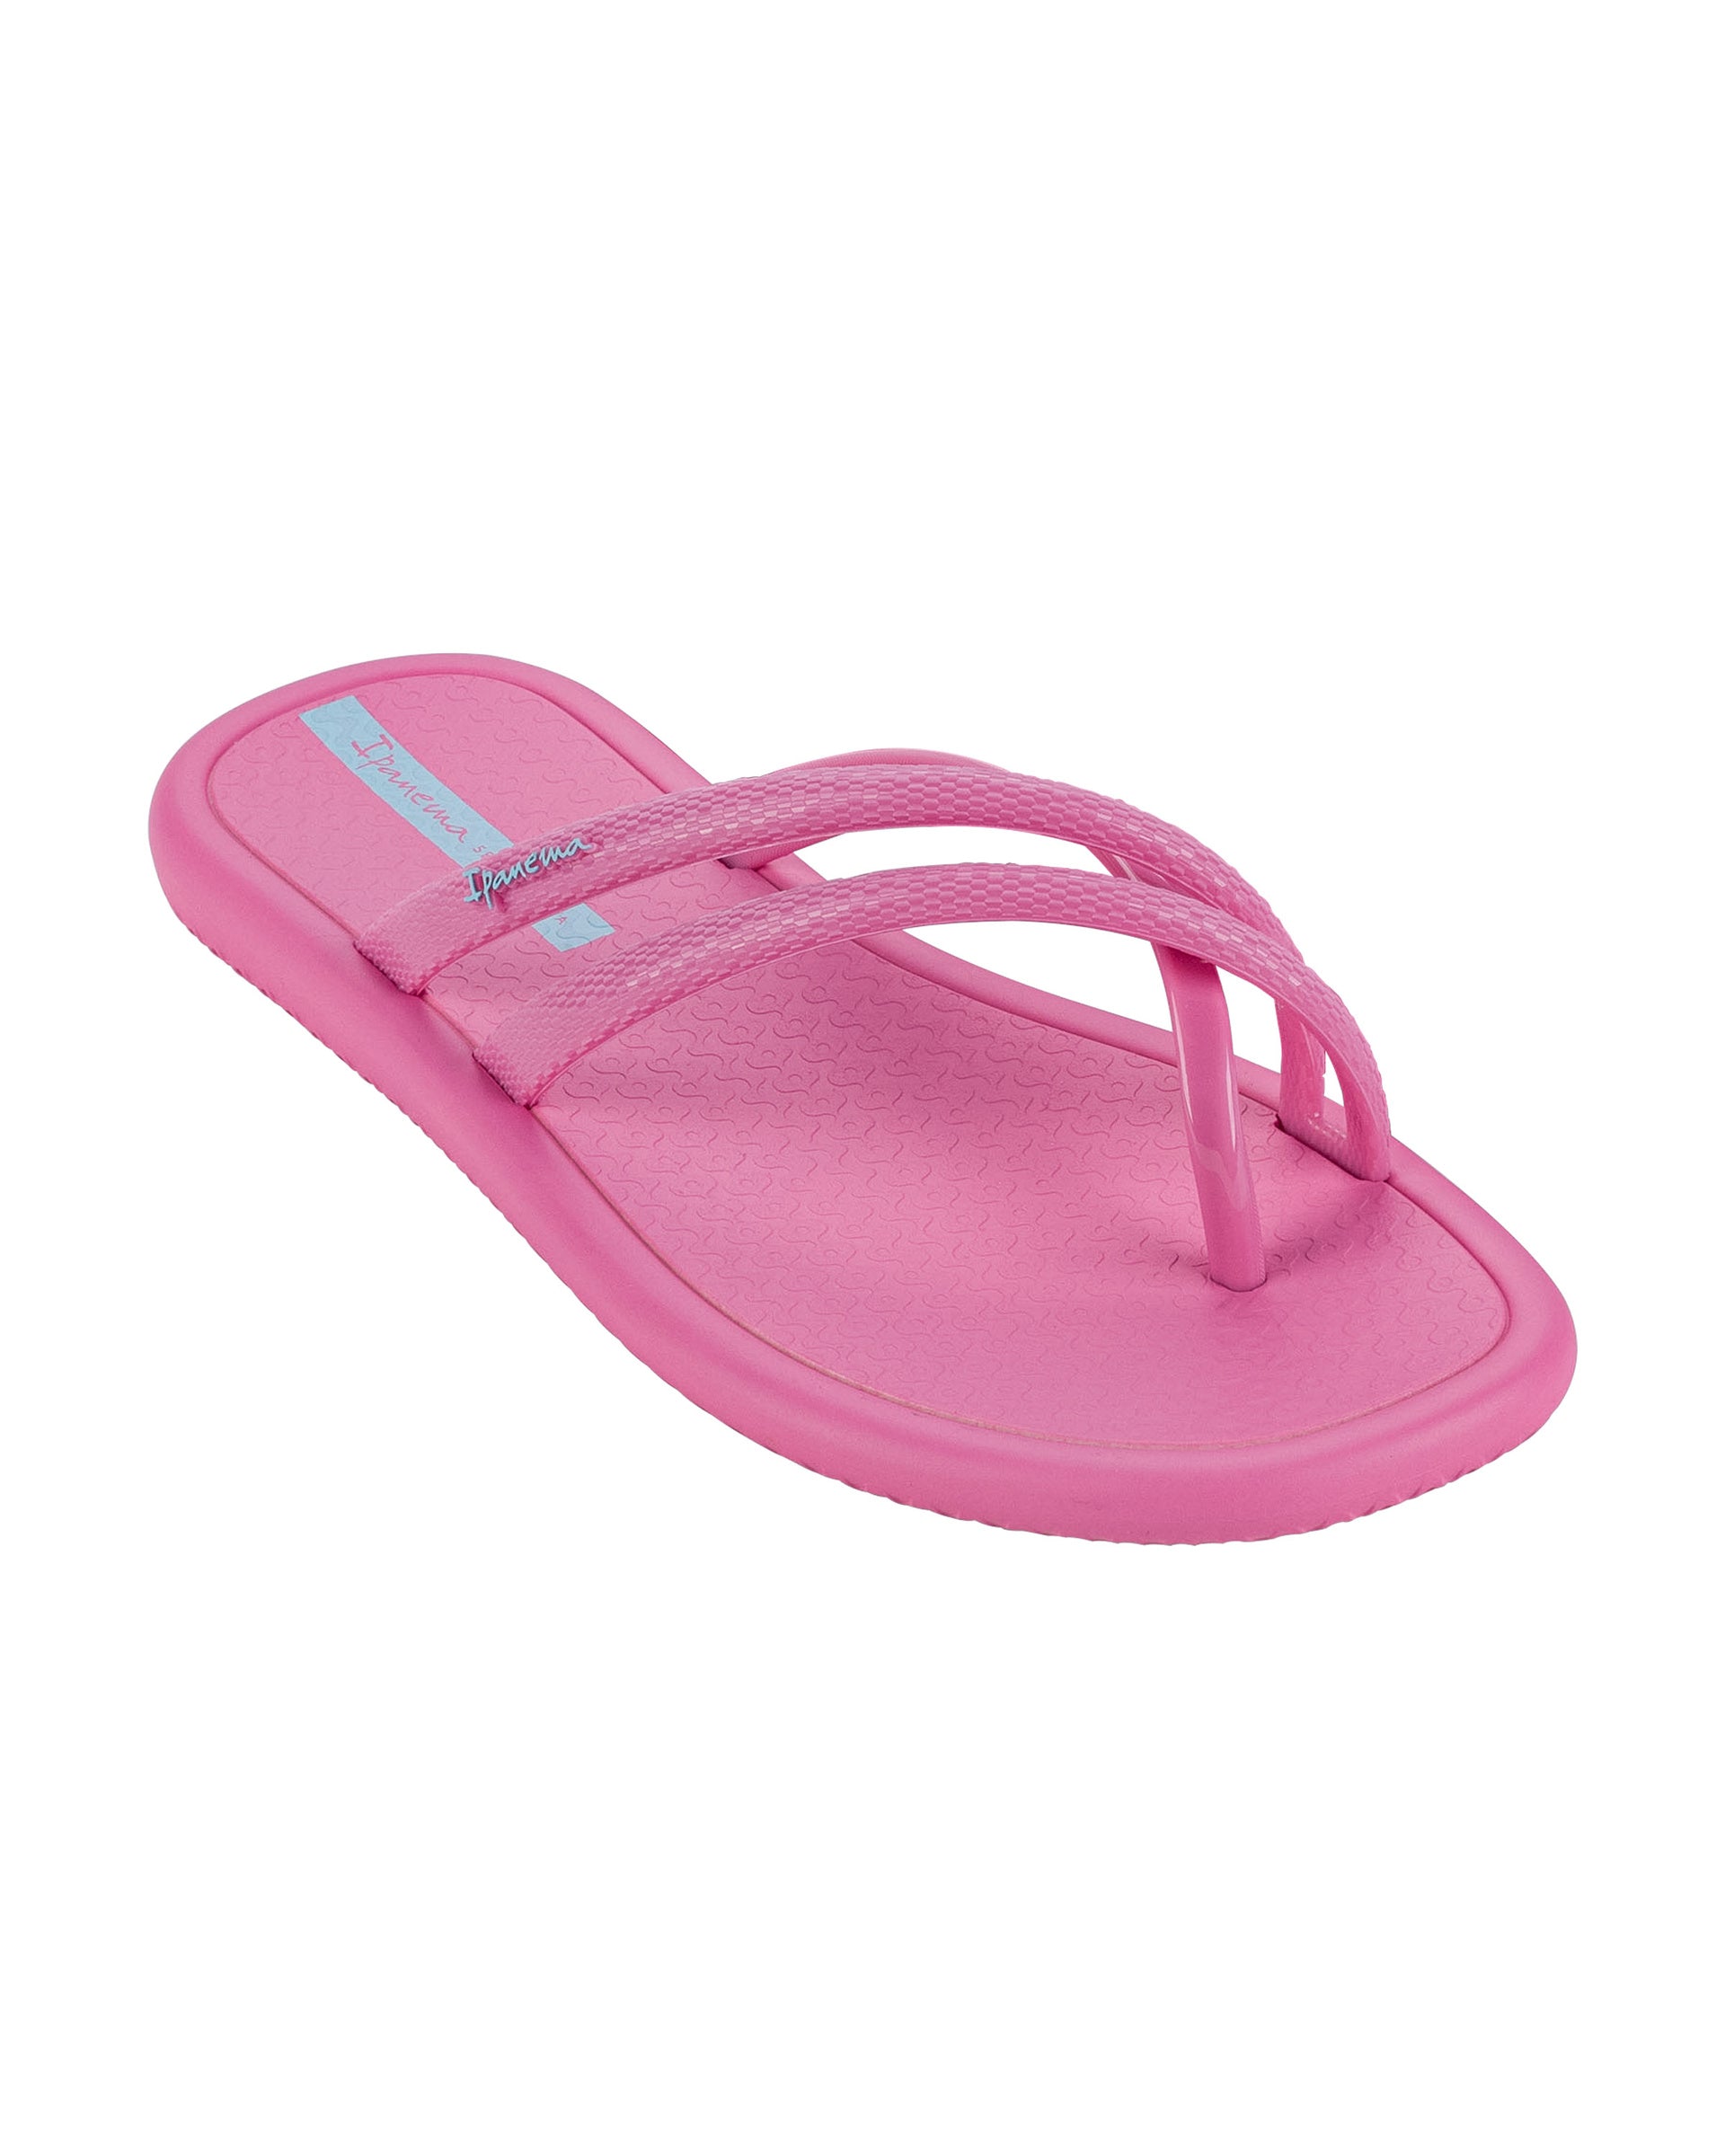 Angled view of a pink Ipanema Meu Sol Rasteira women's flip flop with cross straps.